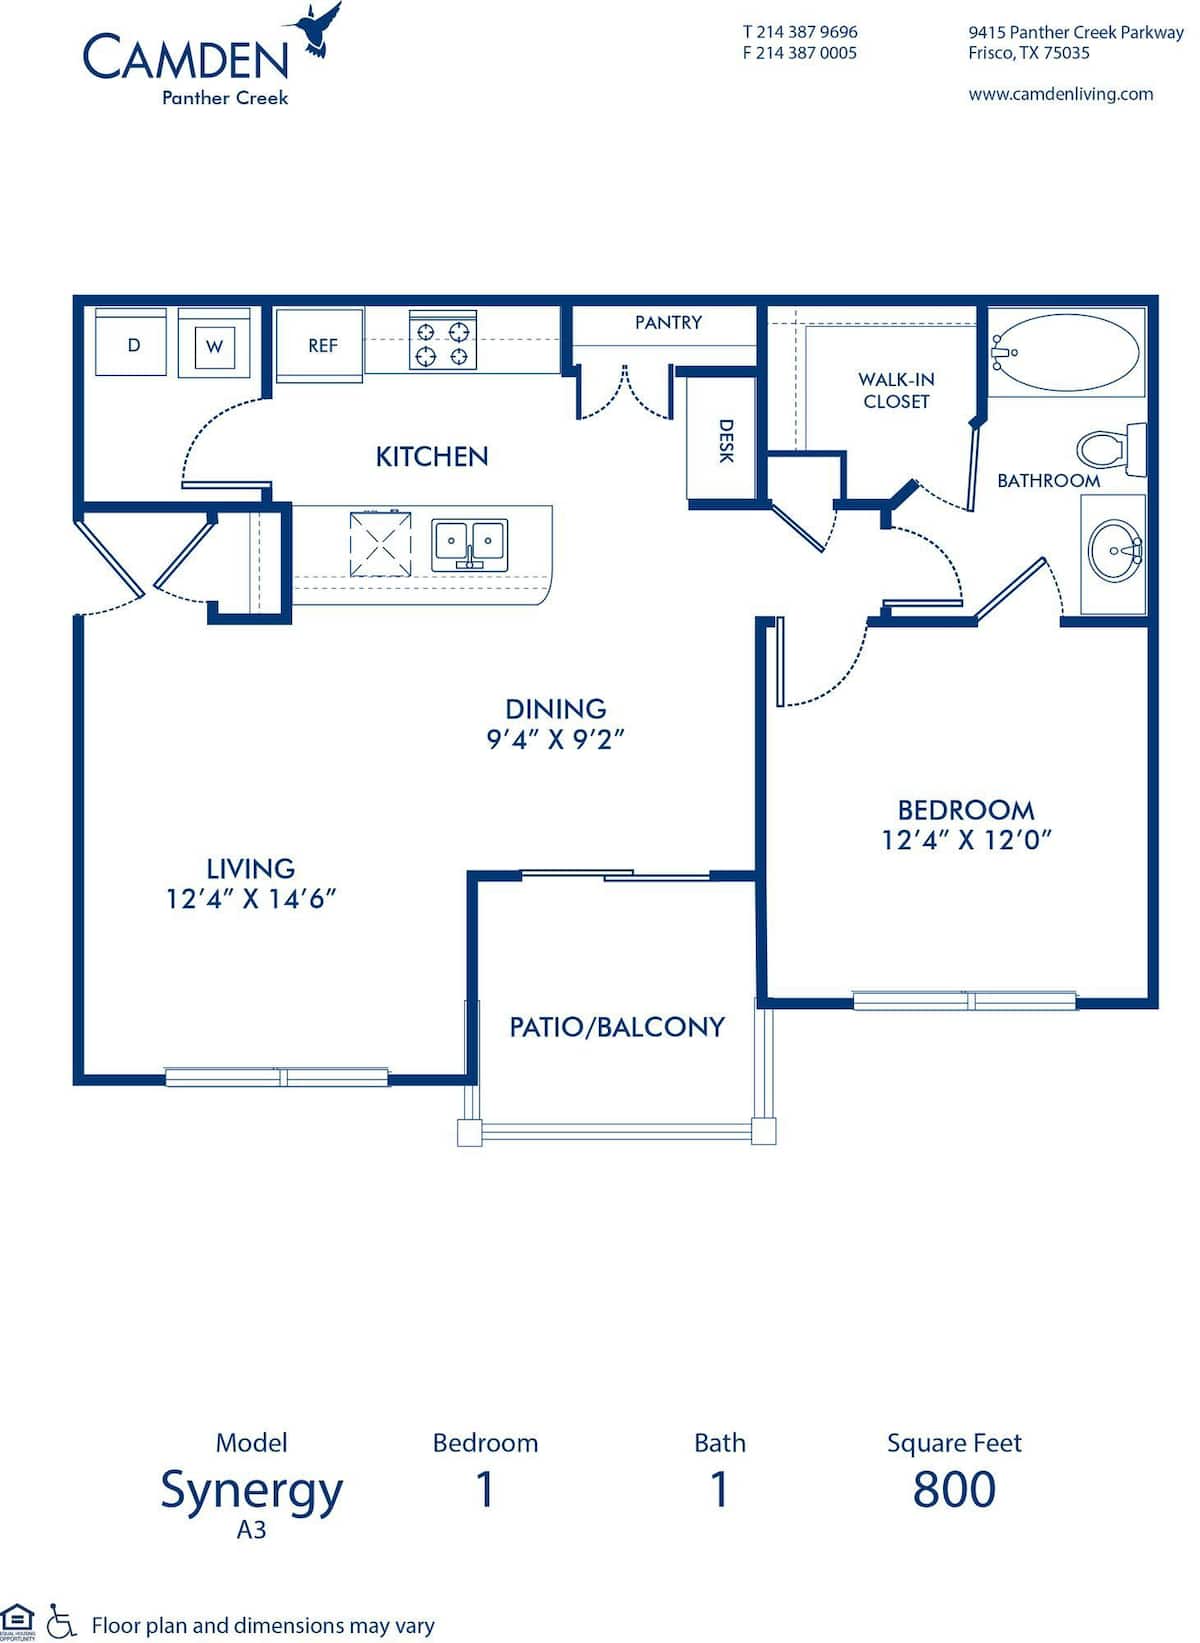 Floorplan diagram for Synergy, showing 1 bedroom